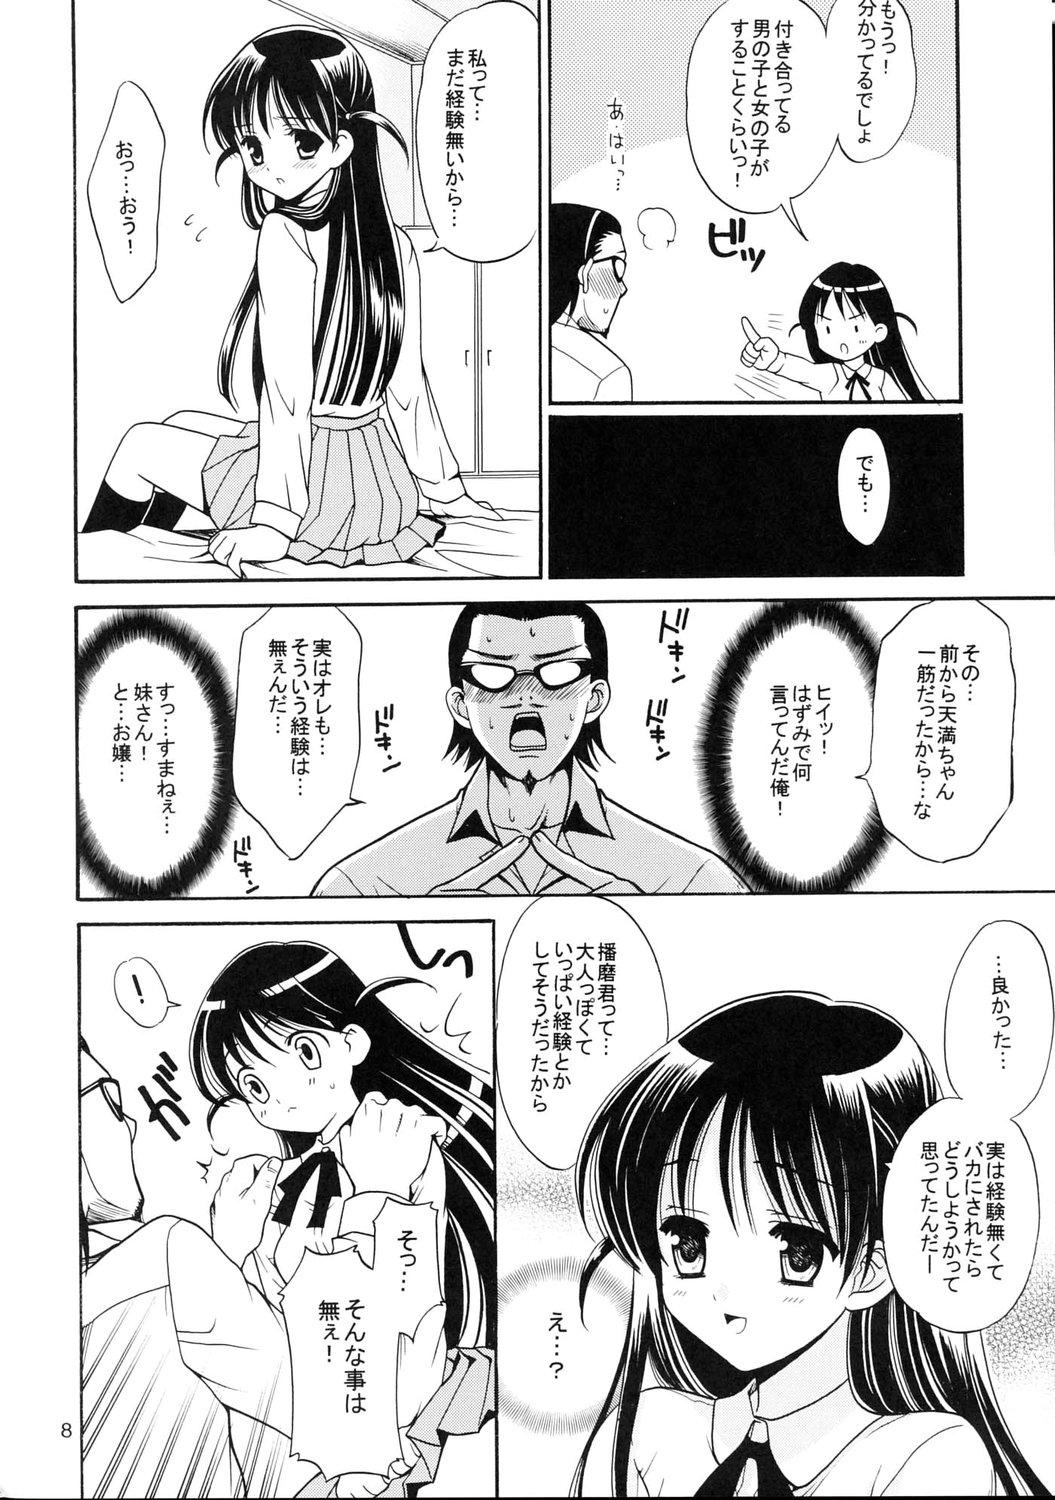 Hunk Hige-seito Harima! 3 - School rumble Ass Fucked - Page 7